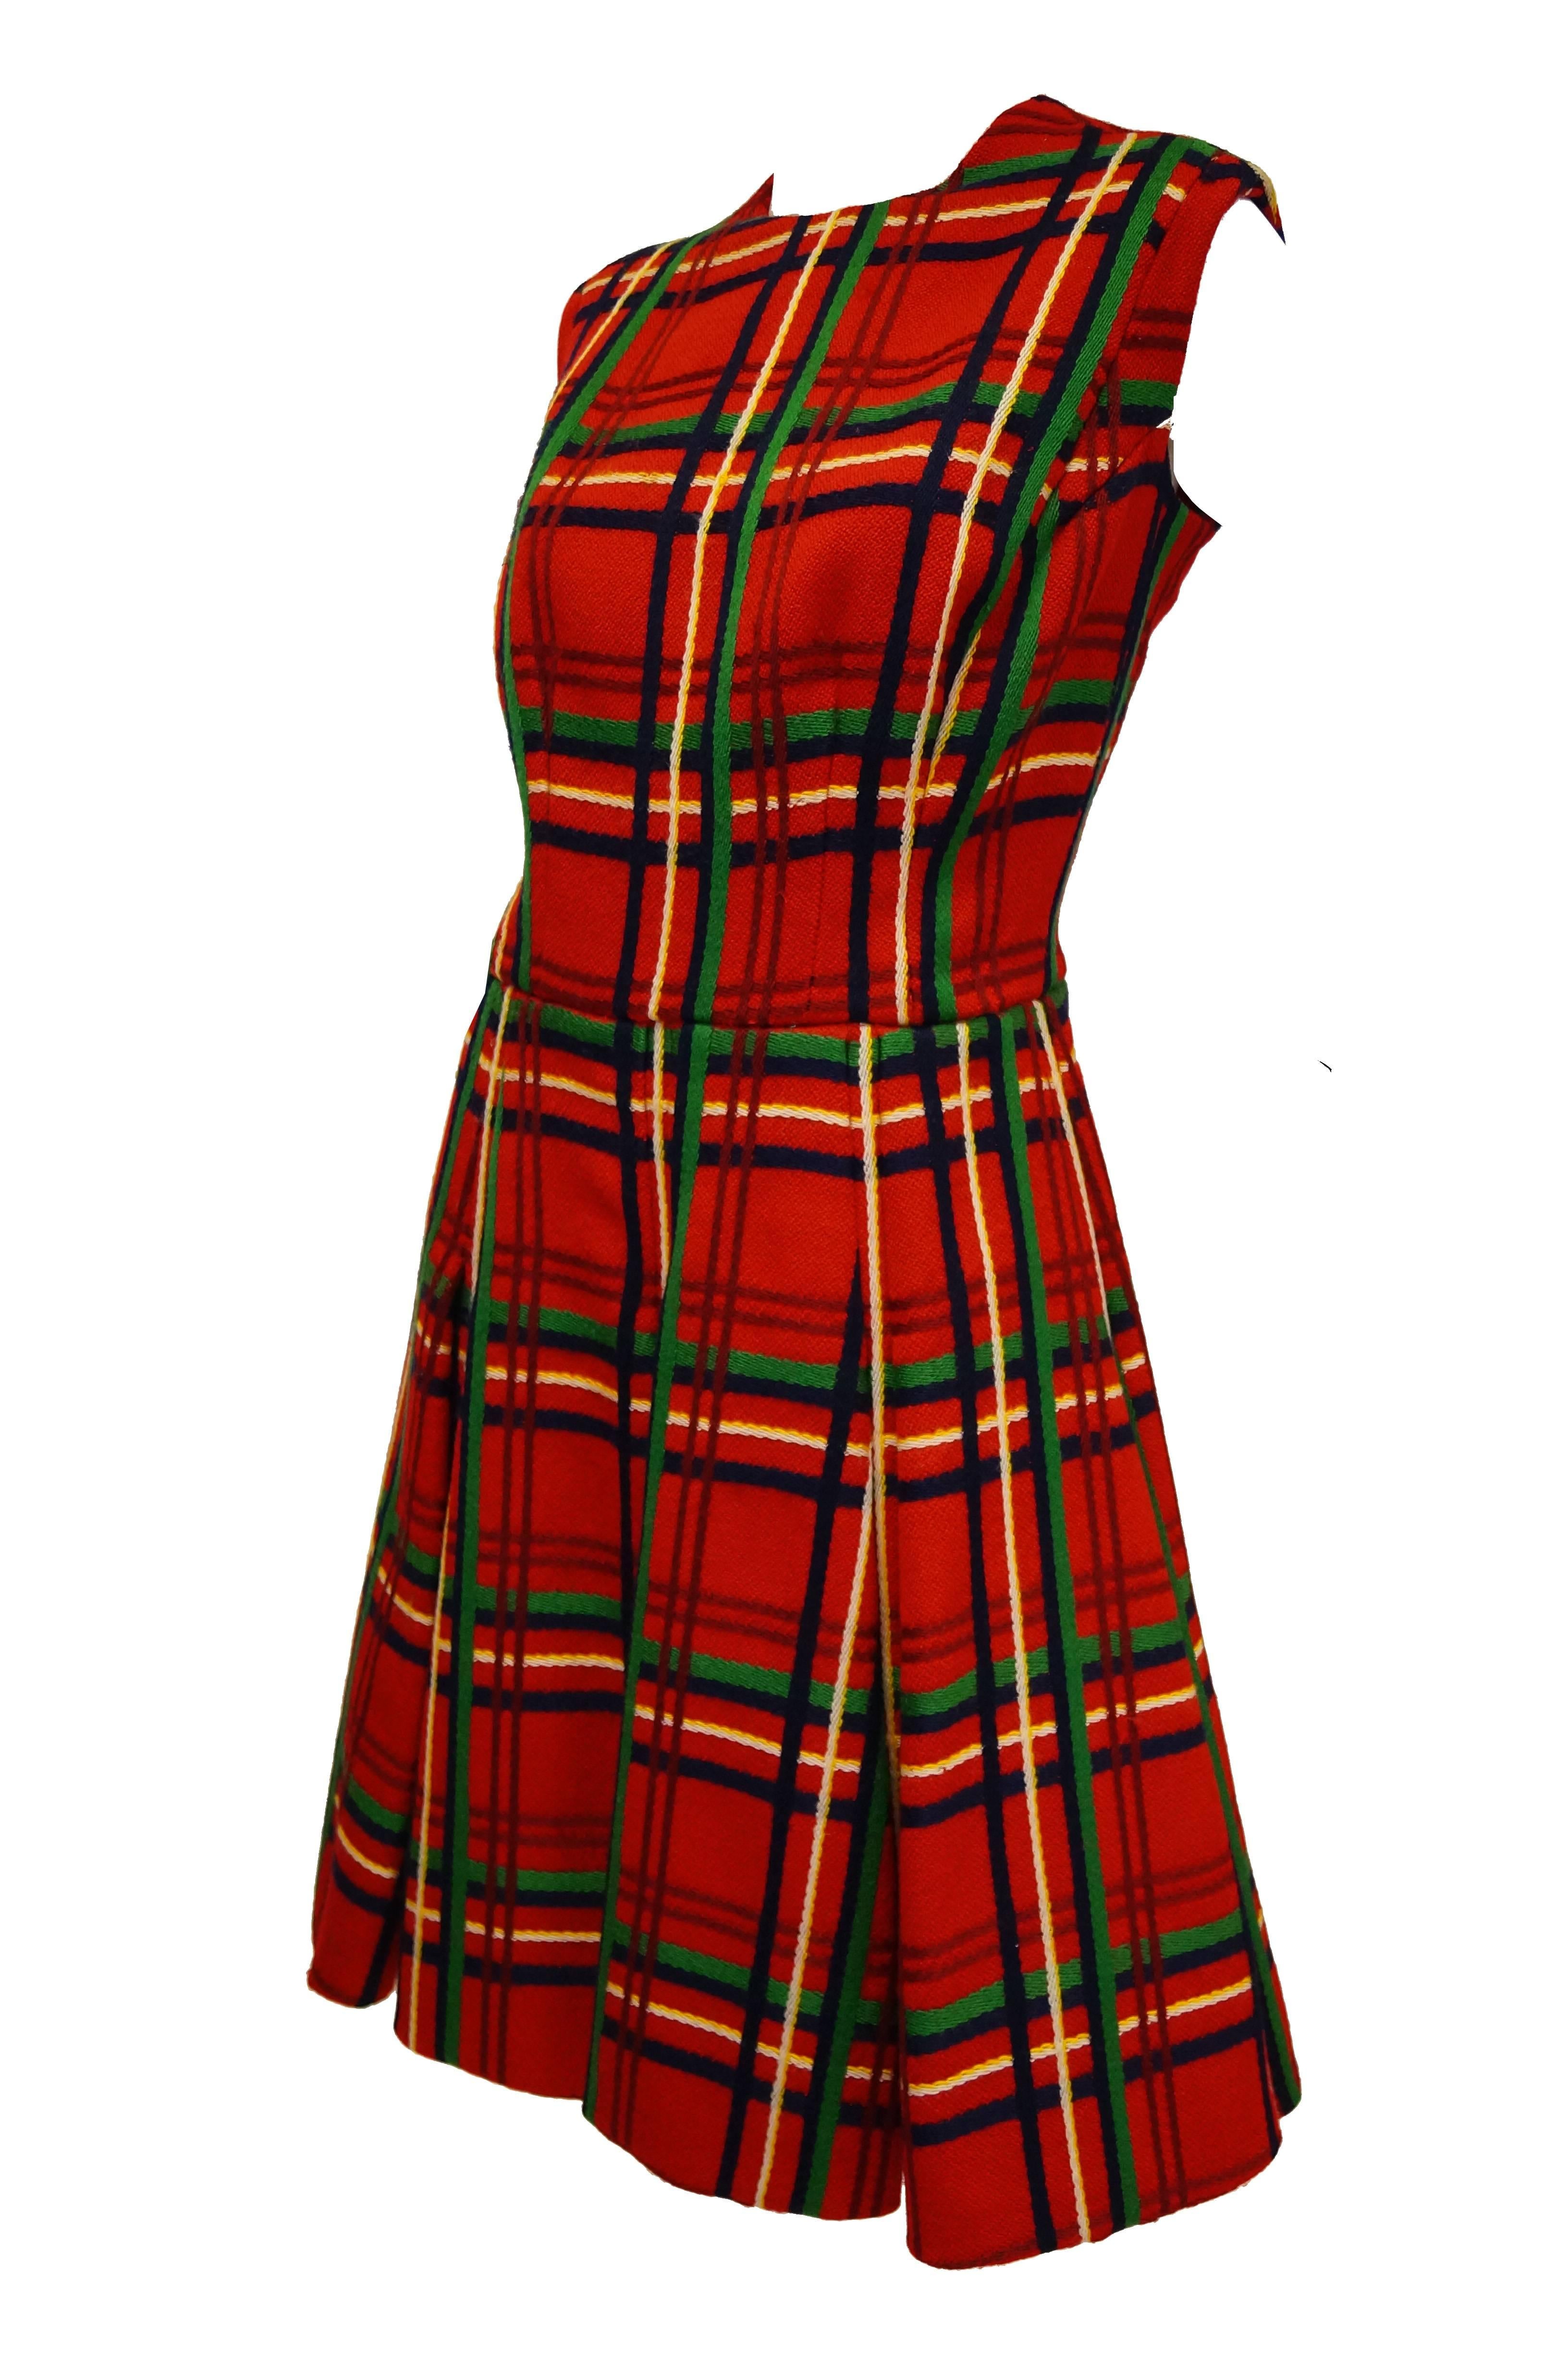 Rich wool and pristine technique and excuation are almost as noticeable as bold colors of red, green, navy, and yellow plaid dress and jacket by Galanos!  This ensemble includes a fit and flare a - line dress with pleated skirt, no sleeves, and a